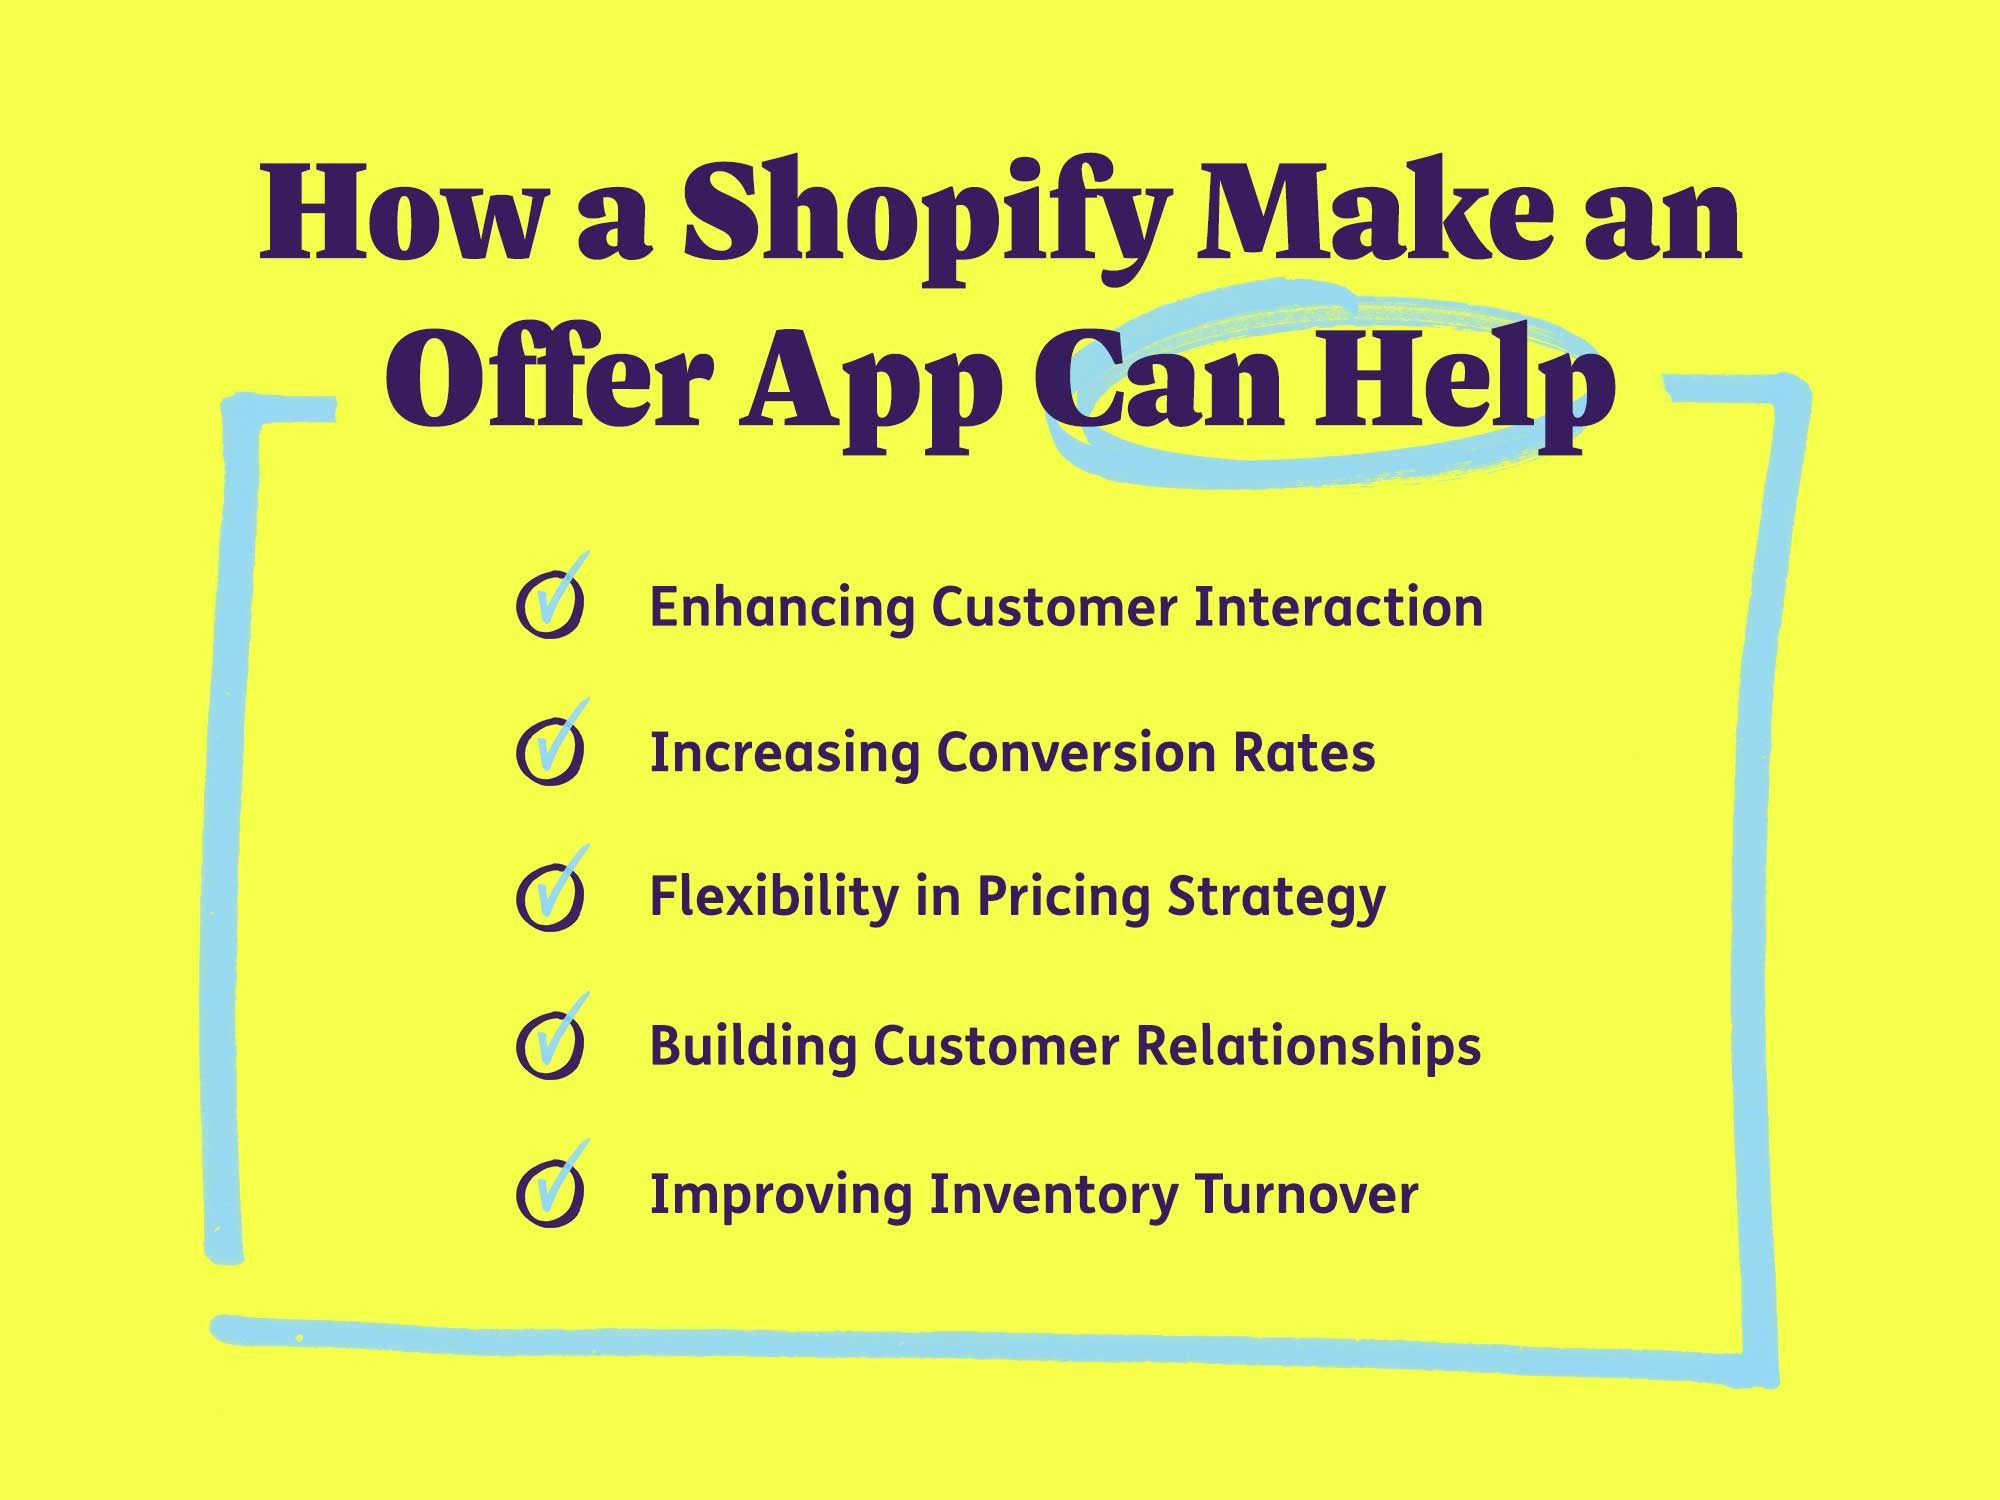 How a Shopify Make an Offer App can Help: Enhancing customer interaction, increasing conversion rates, flexibility in pricing strategy, building customer relationships, improving inventory turnover